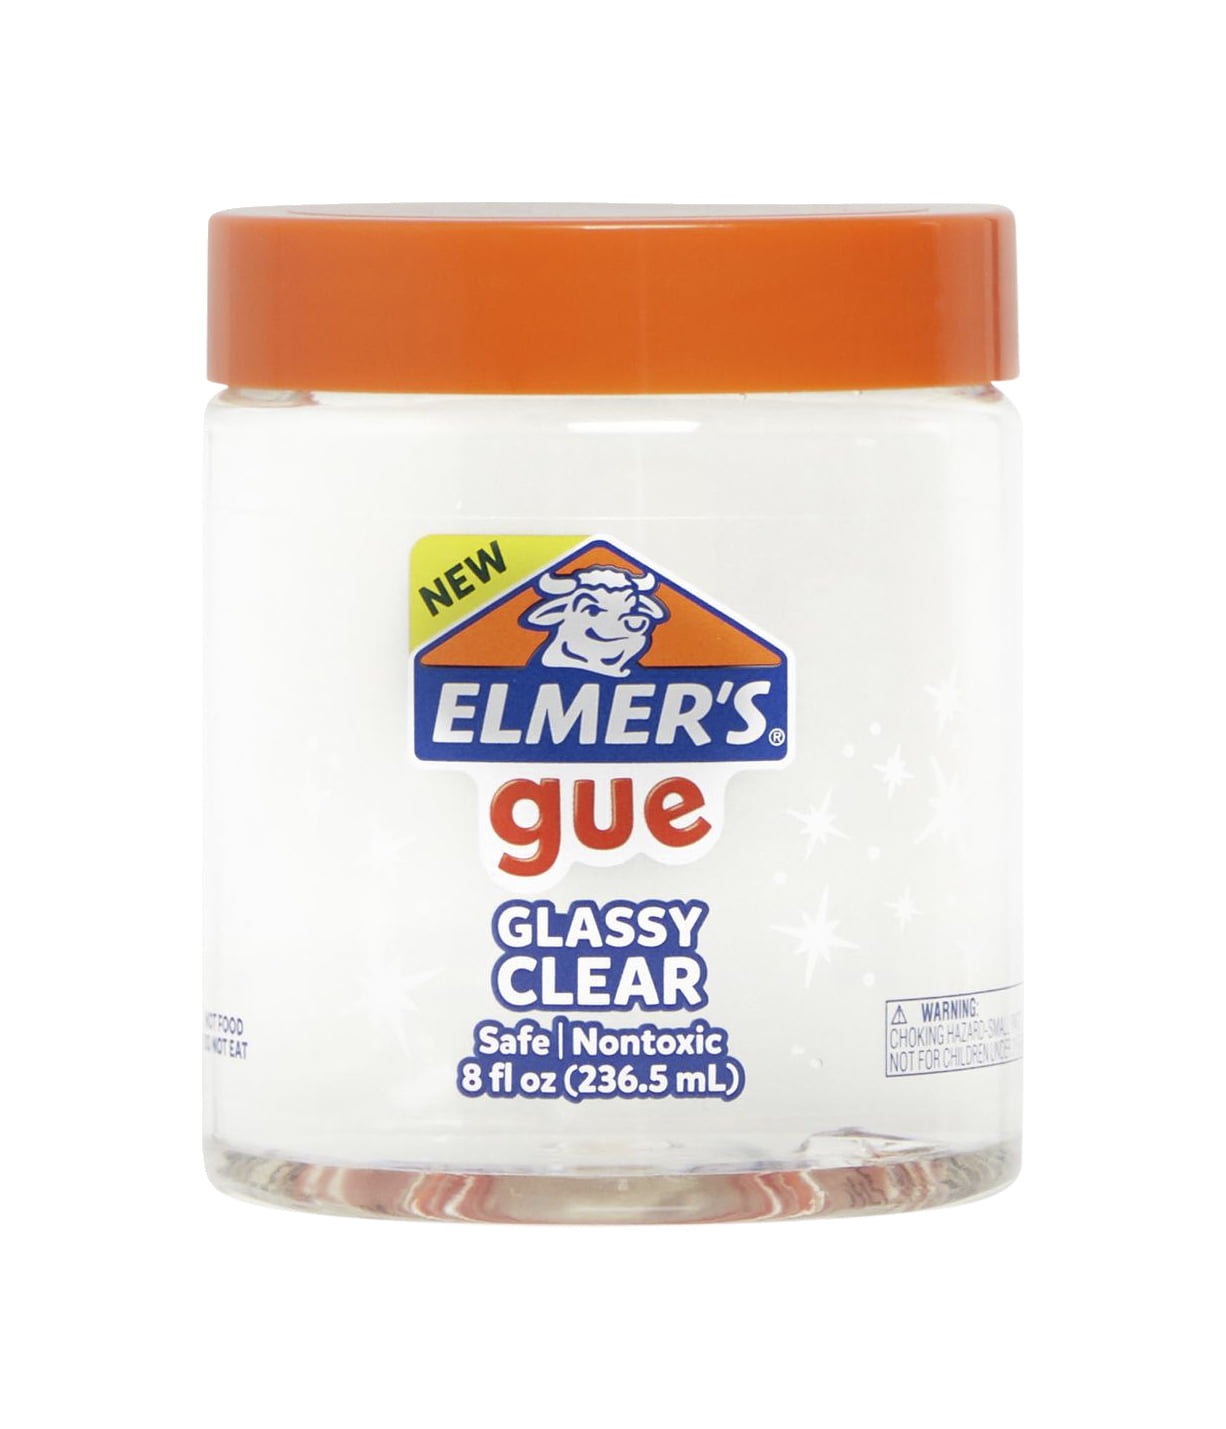 6 Pack: Elmer's® Gue Deep Gue Sea Premade Slime with Mix-Ins